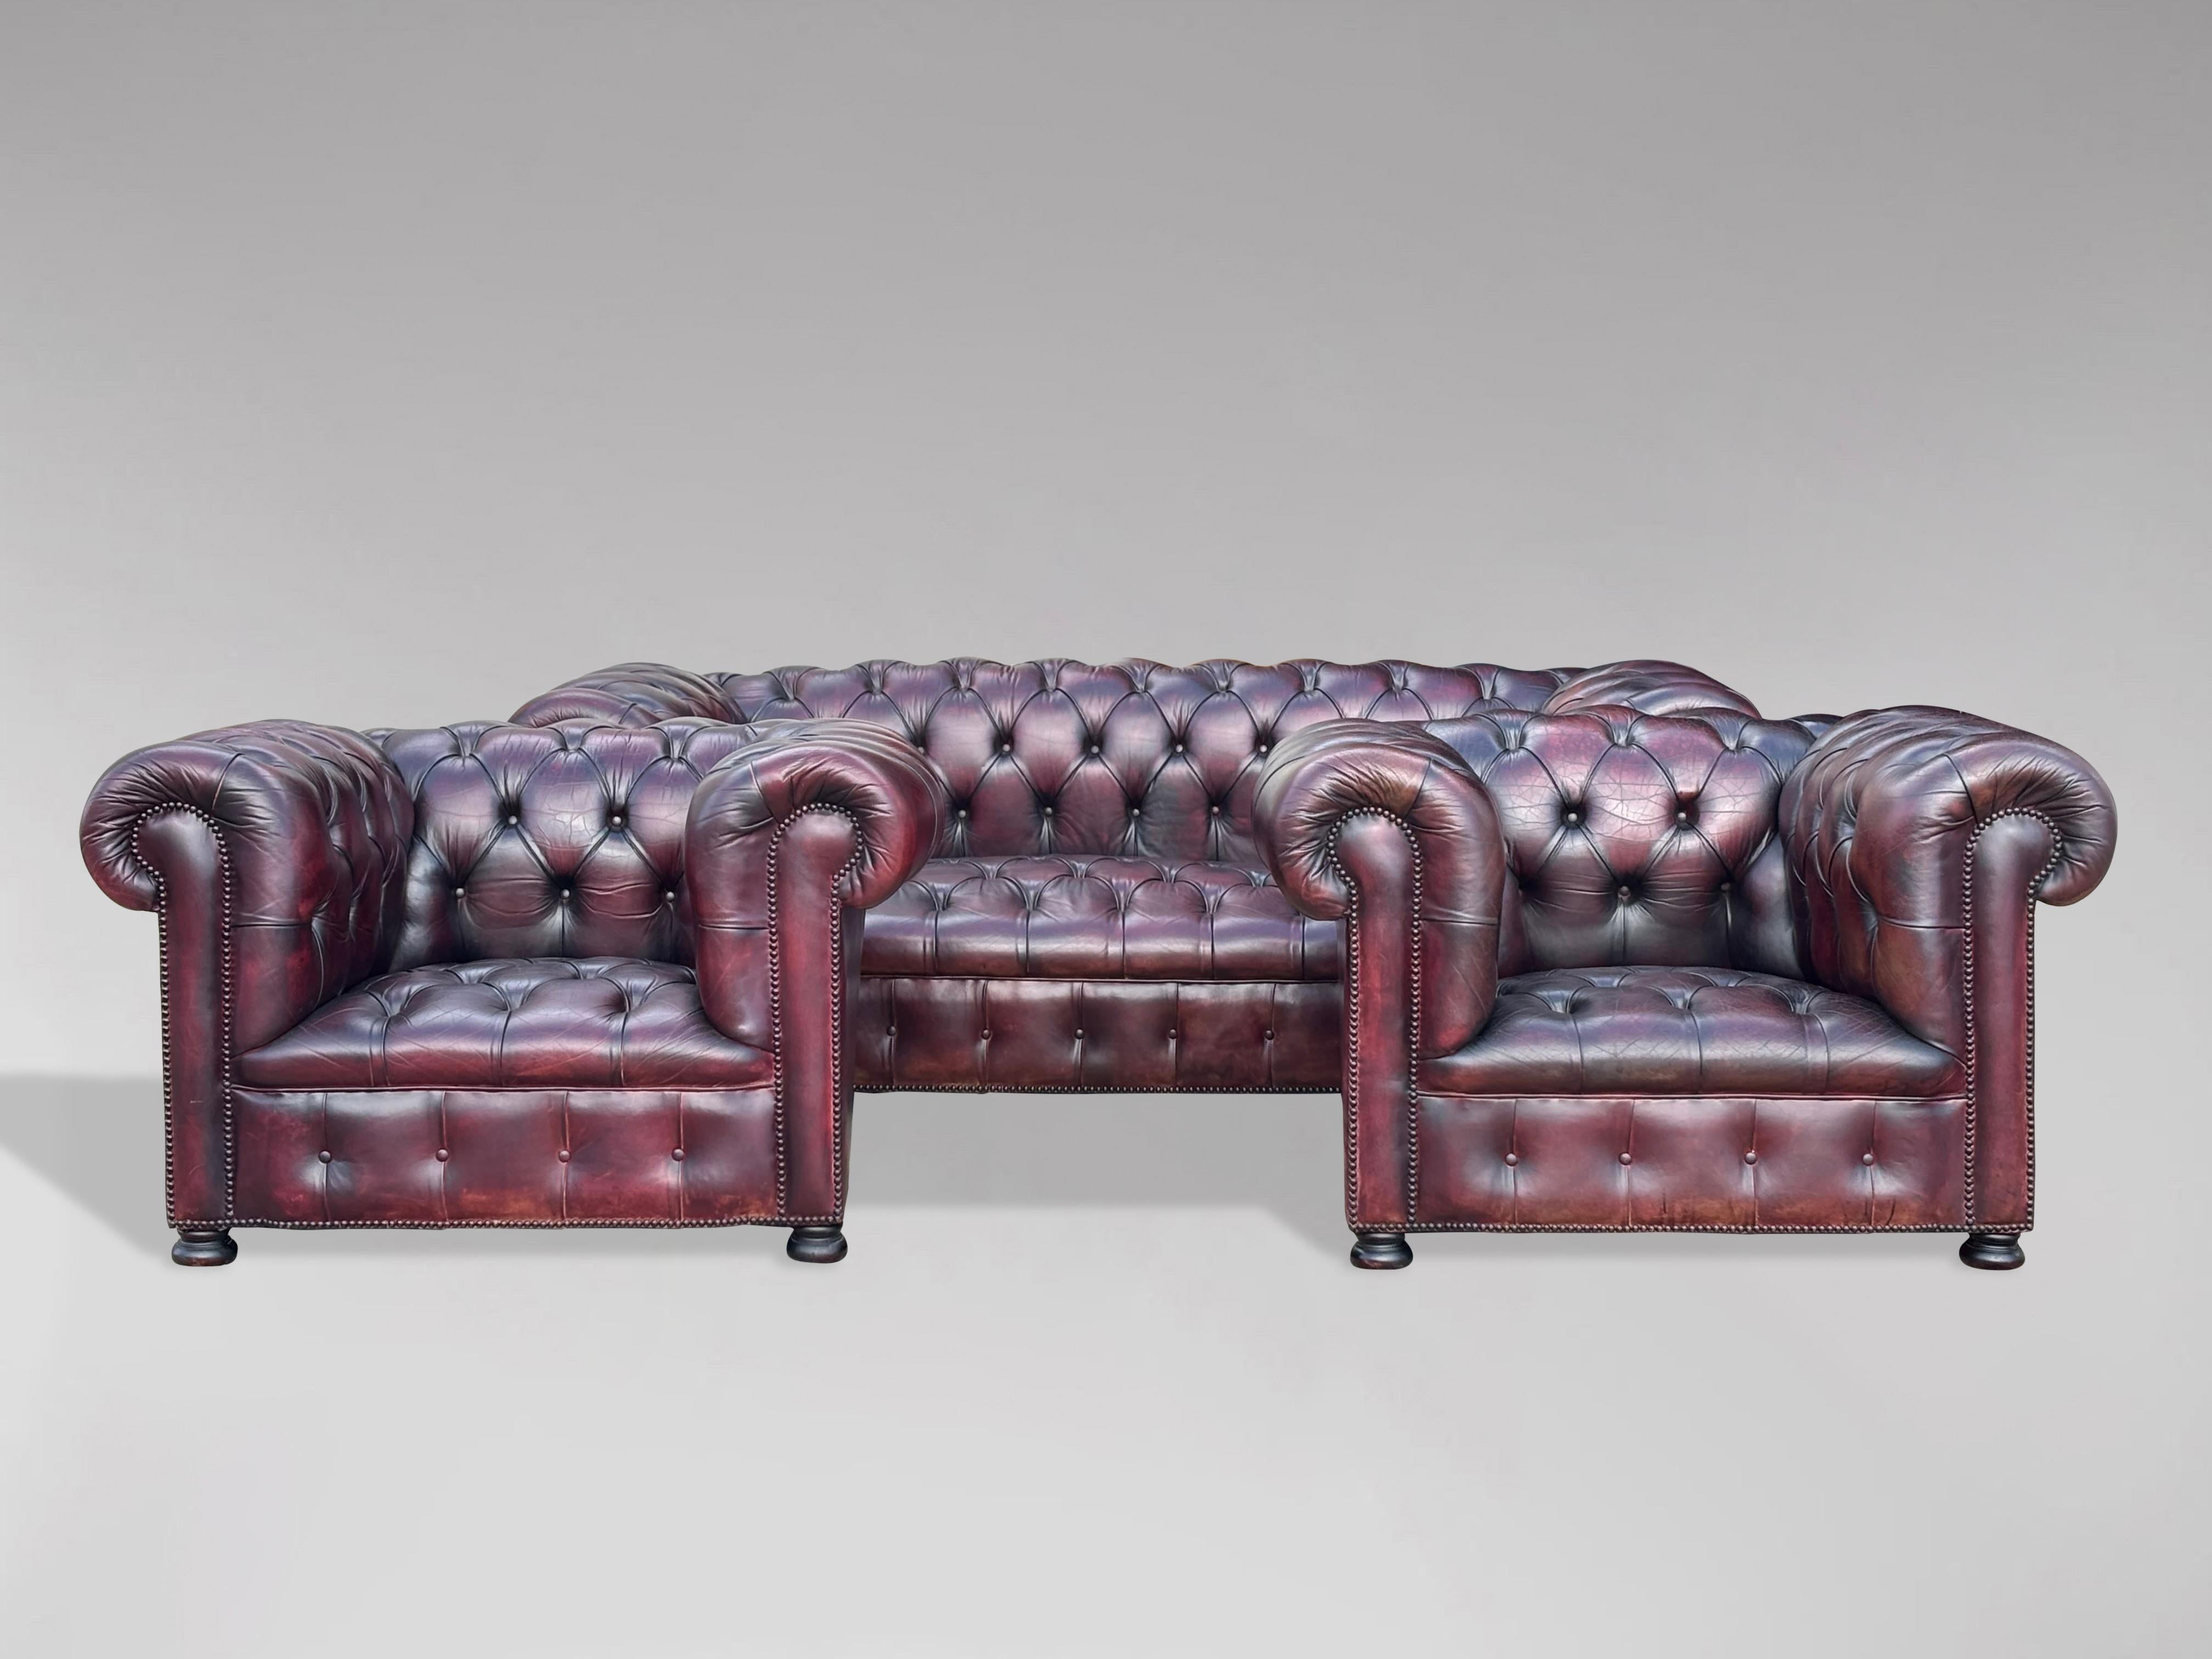 A good quality mid 20th century prune colour leather vintage chesterfield suite. With the original prune burgundy leather hide that has been cleaned and polished giving a lovely soft and sumptuous feel to the quality leather. Comprising a large